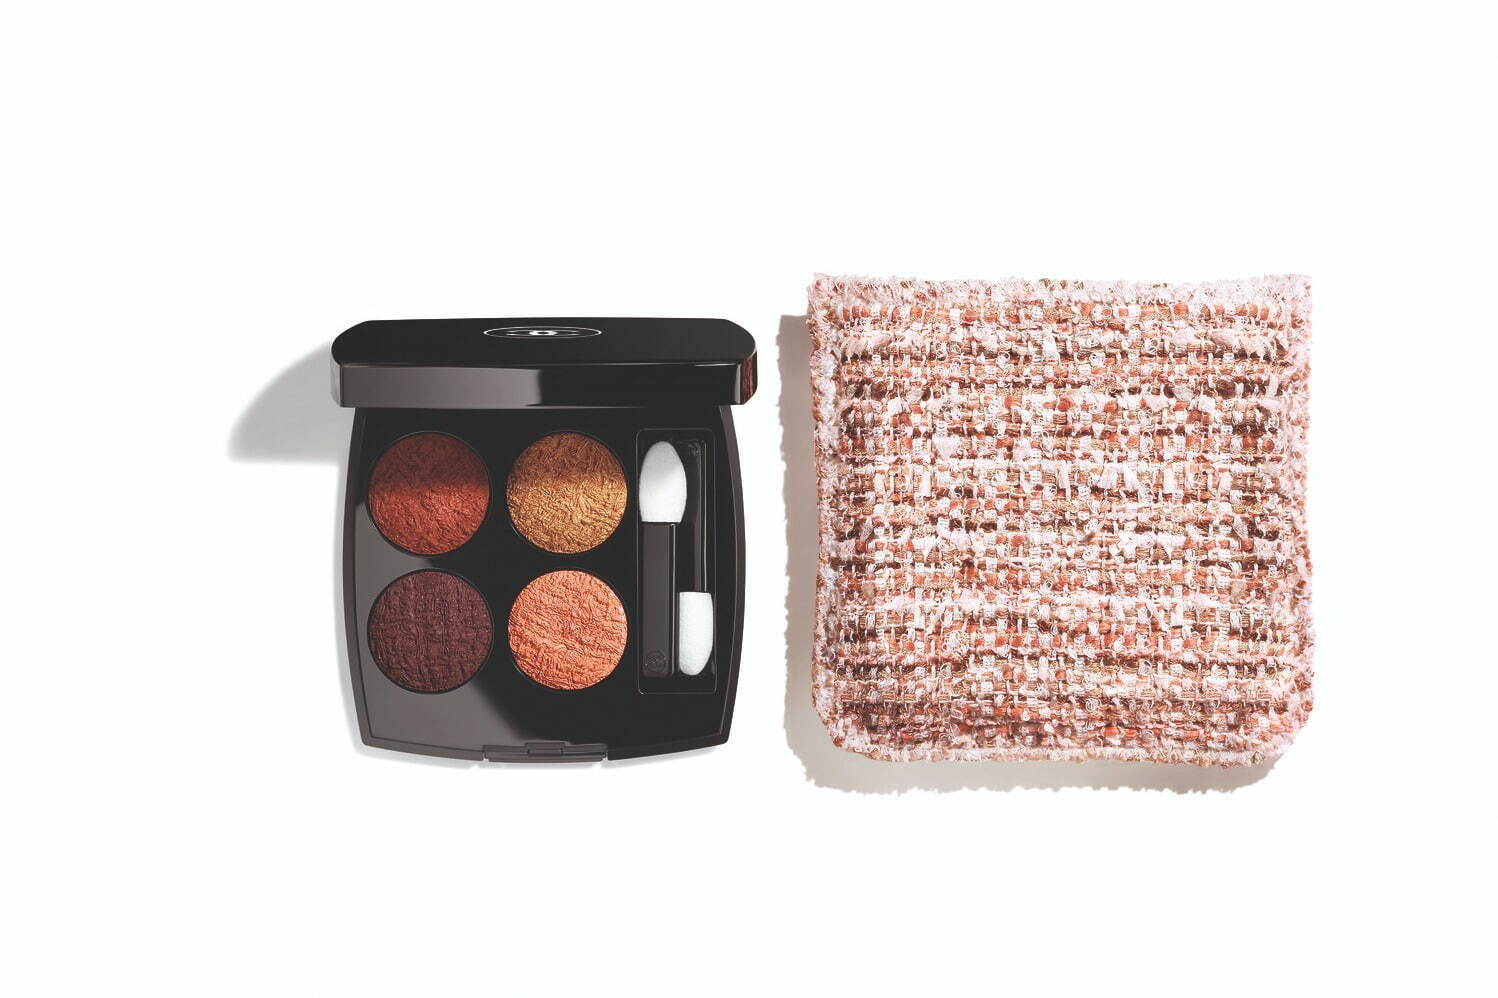 Chanel Drops Tweed Makeup & Other Beauty News In Sept 2022